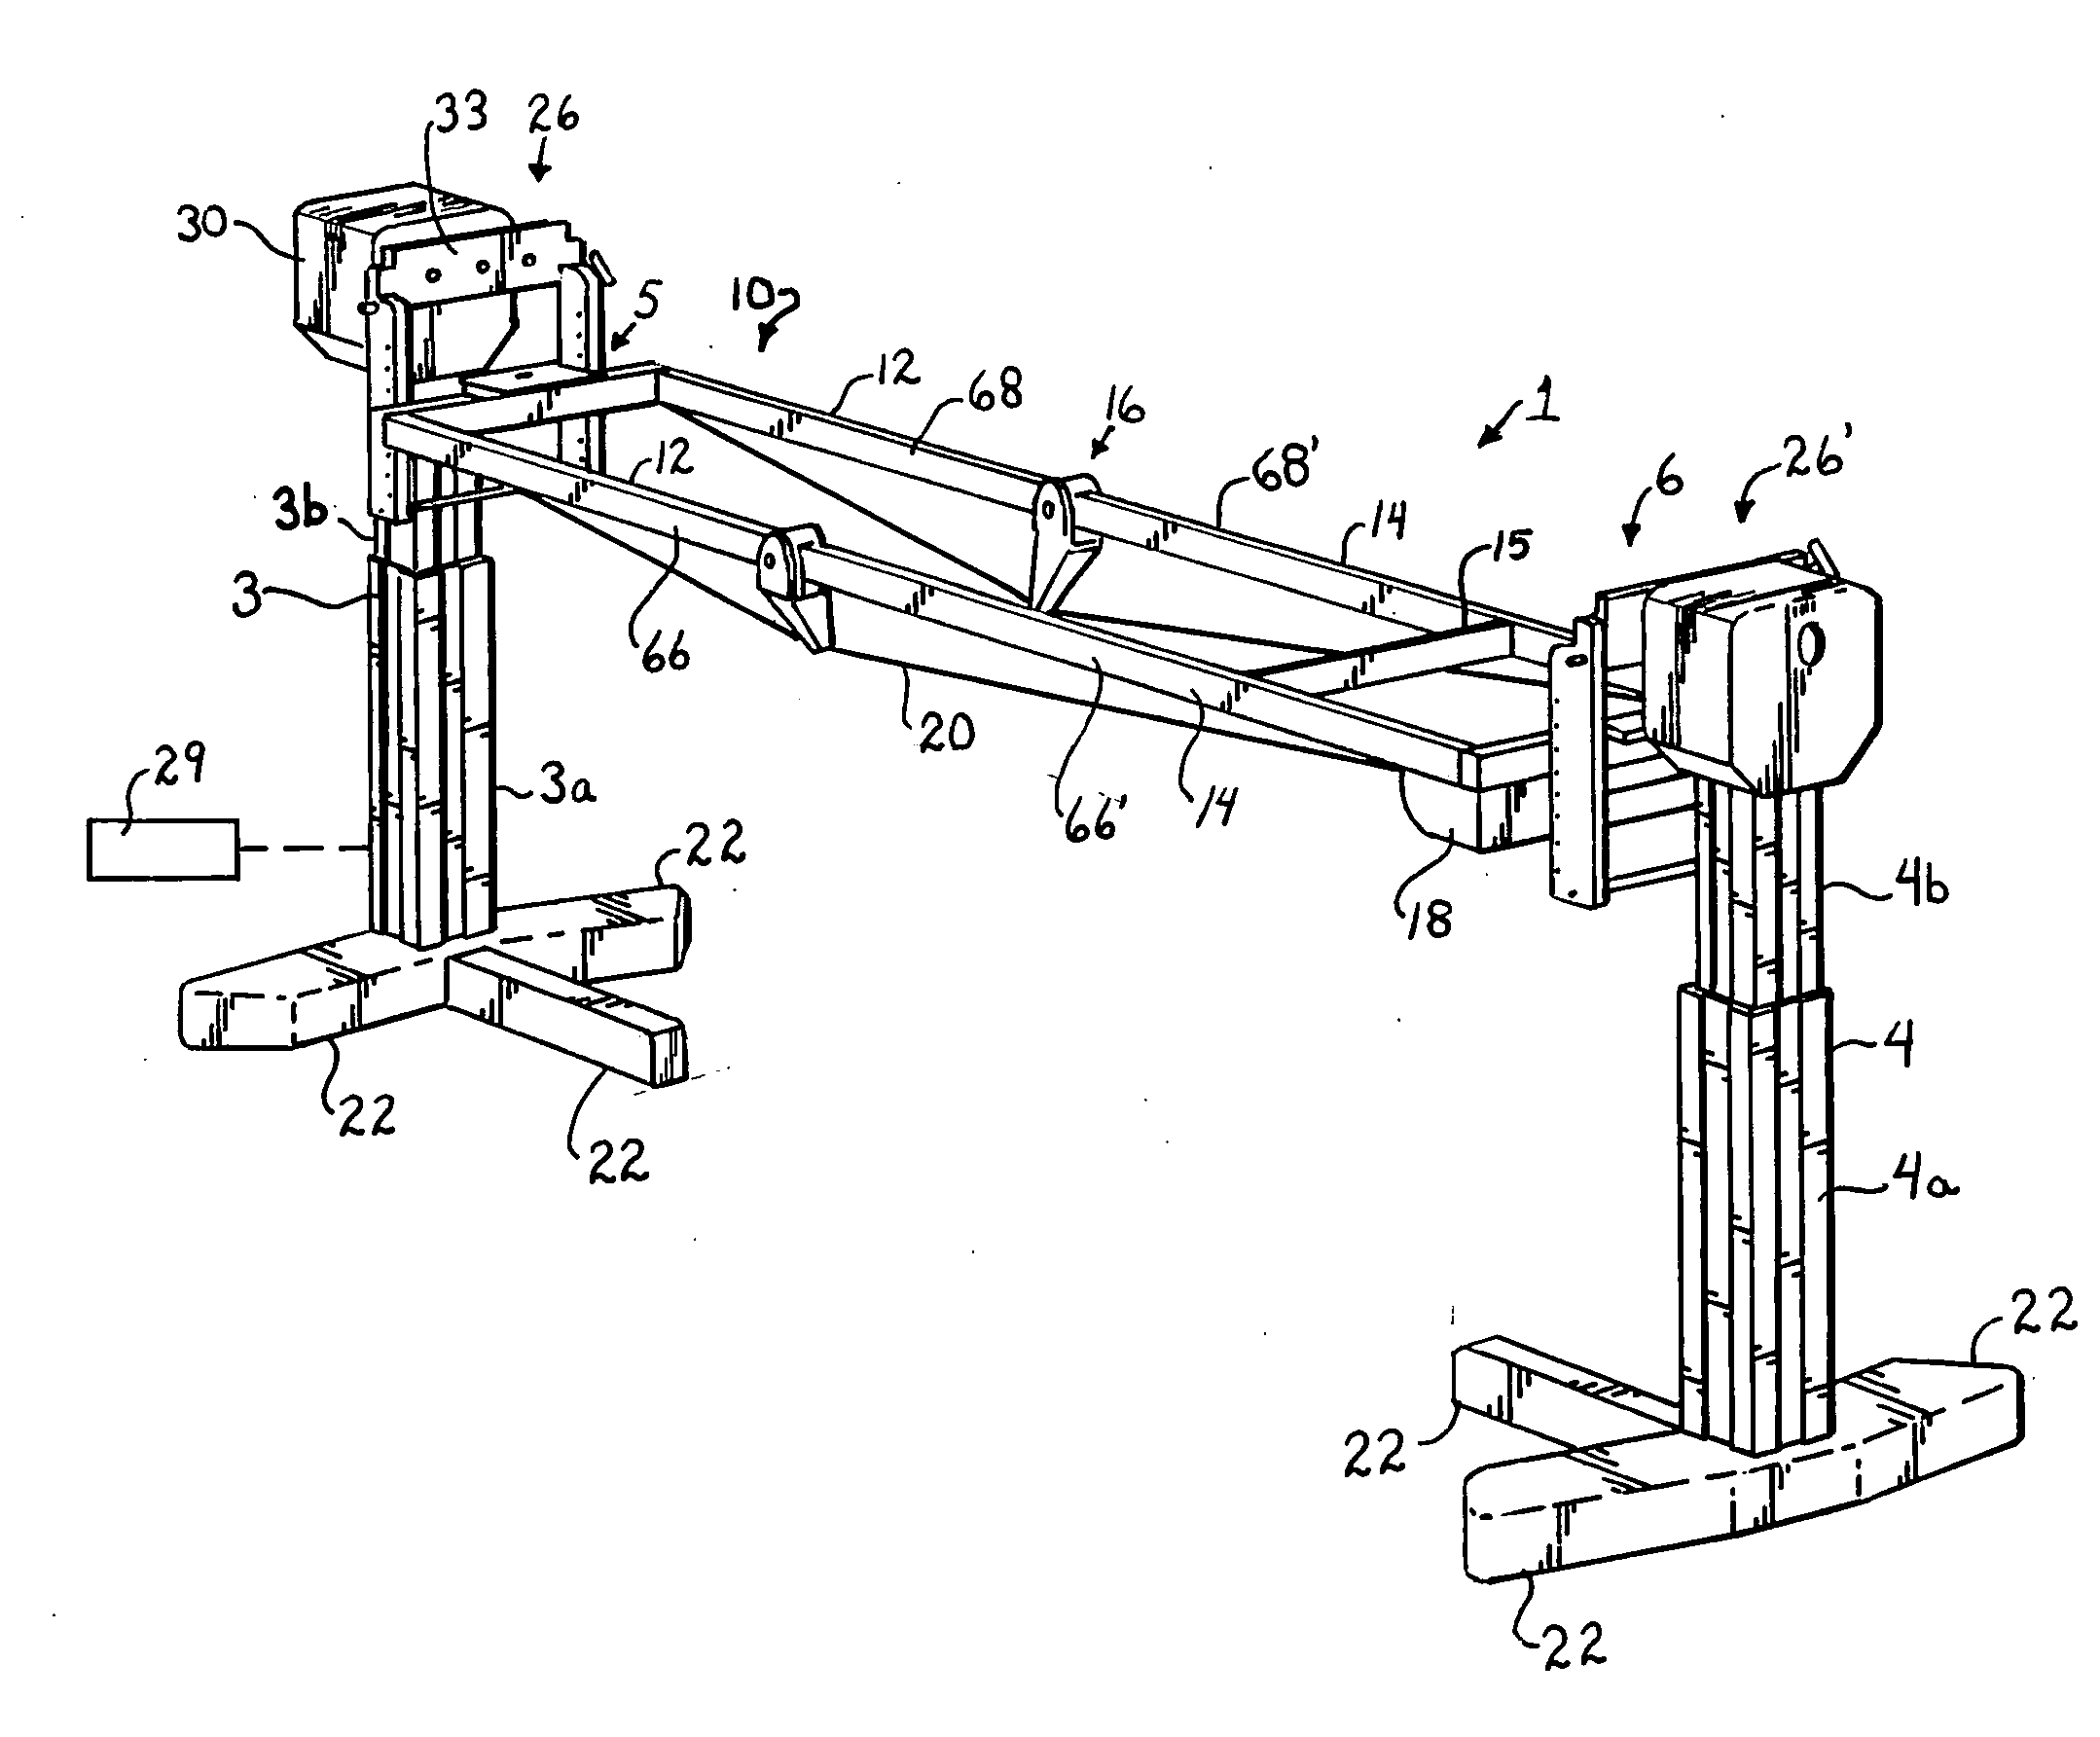 Patient positioning support structure with coordinated continuous nonsegmented articulation, rotation and lift, and locking fail-safe device